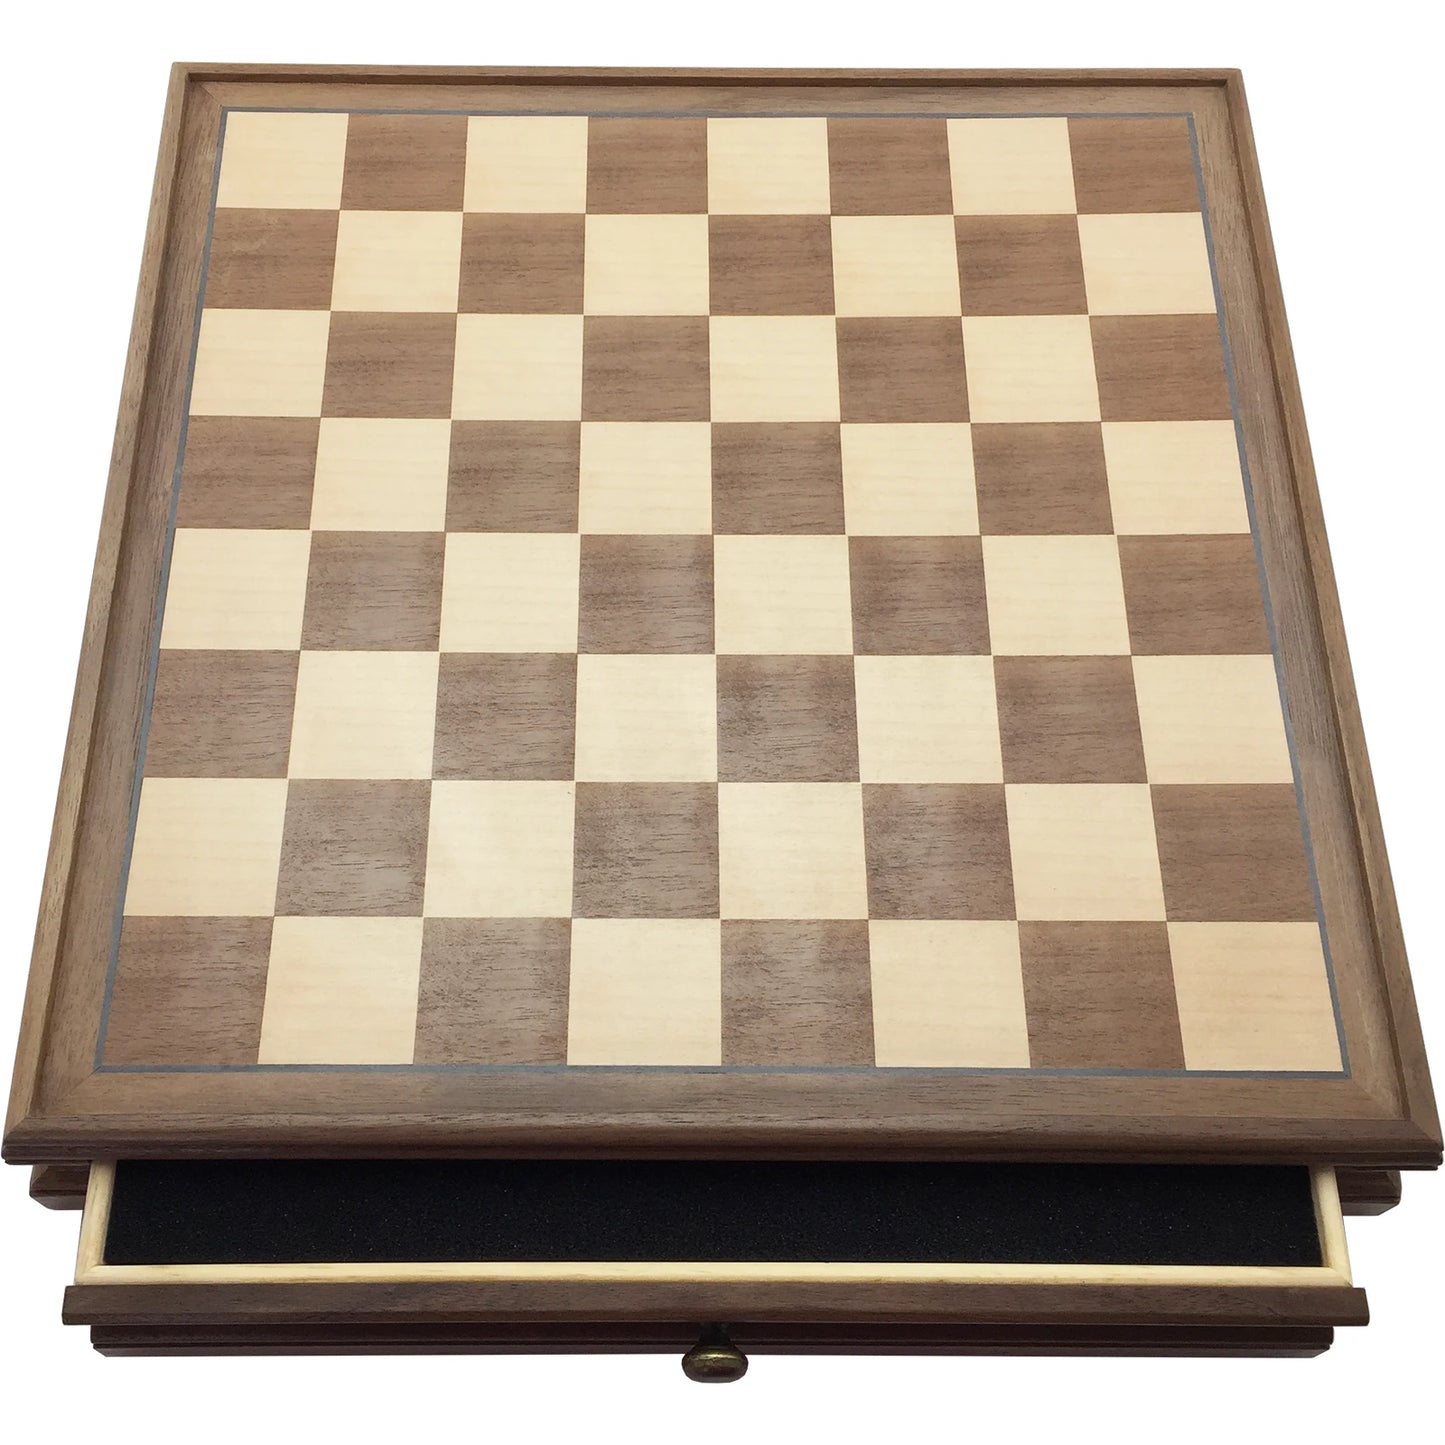 Wood chess board with drawers. One drawer open.